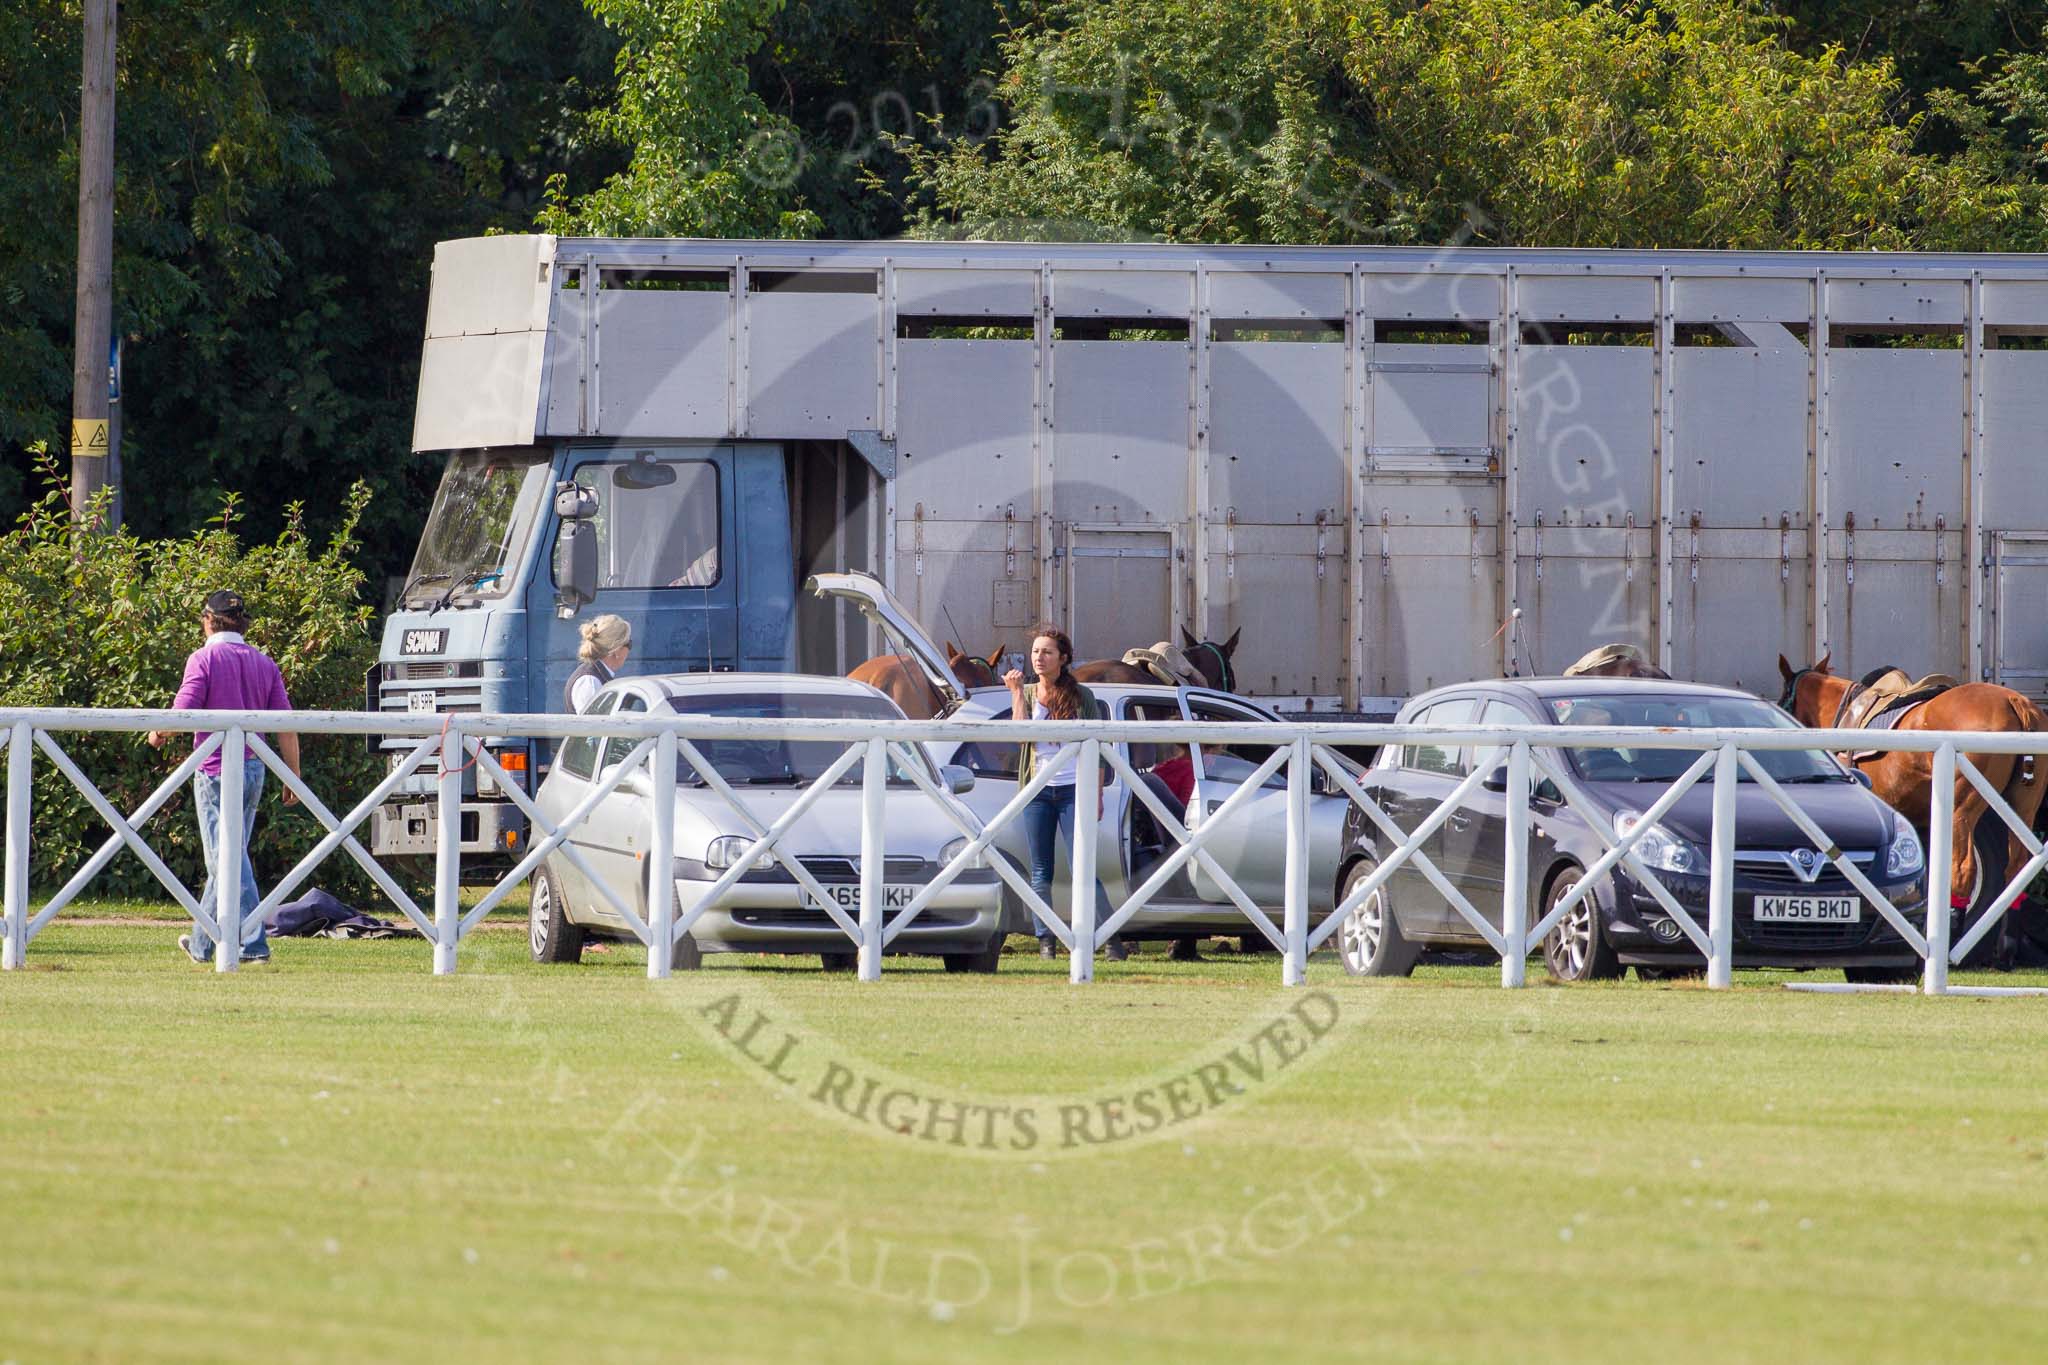 DBPC Polo in the Park 2013.
Dallas Burston Polo Club, ,
Southam,
Warwickshire,
United Kingdom,
on 01 September 2013 at 10:13, image #20